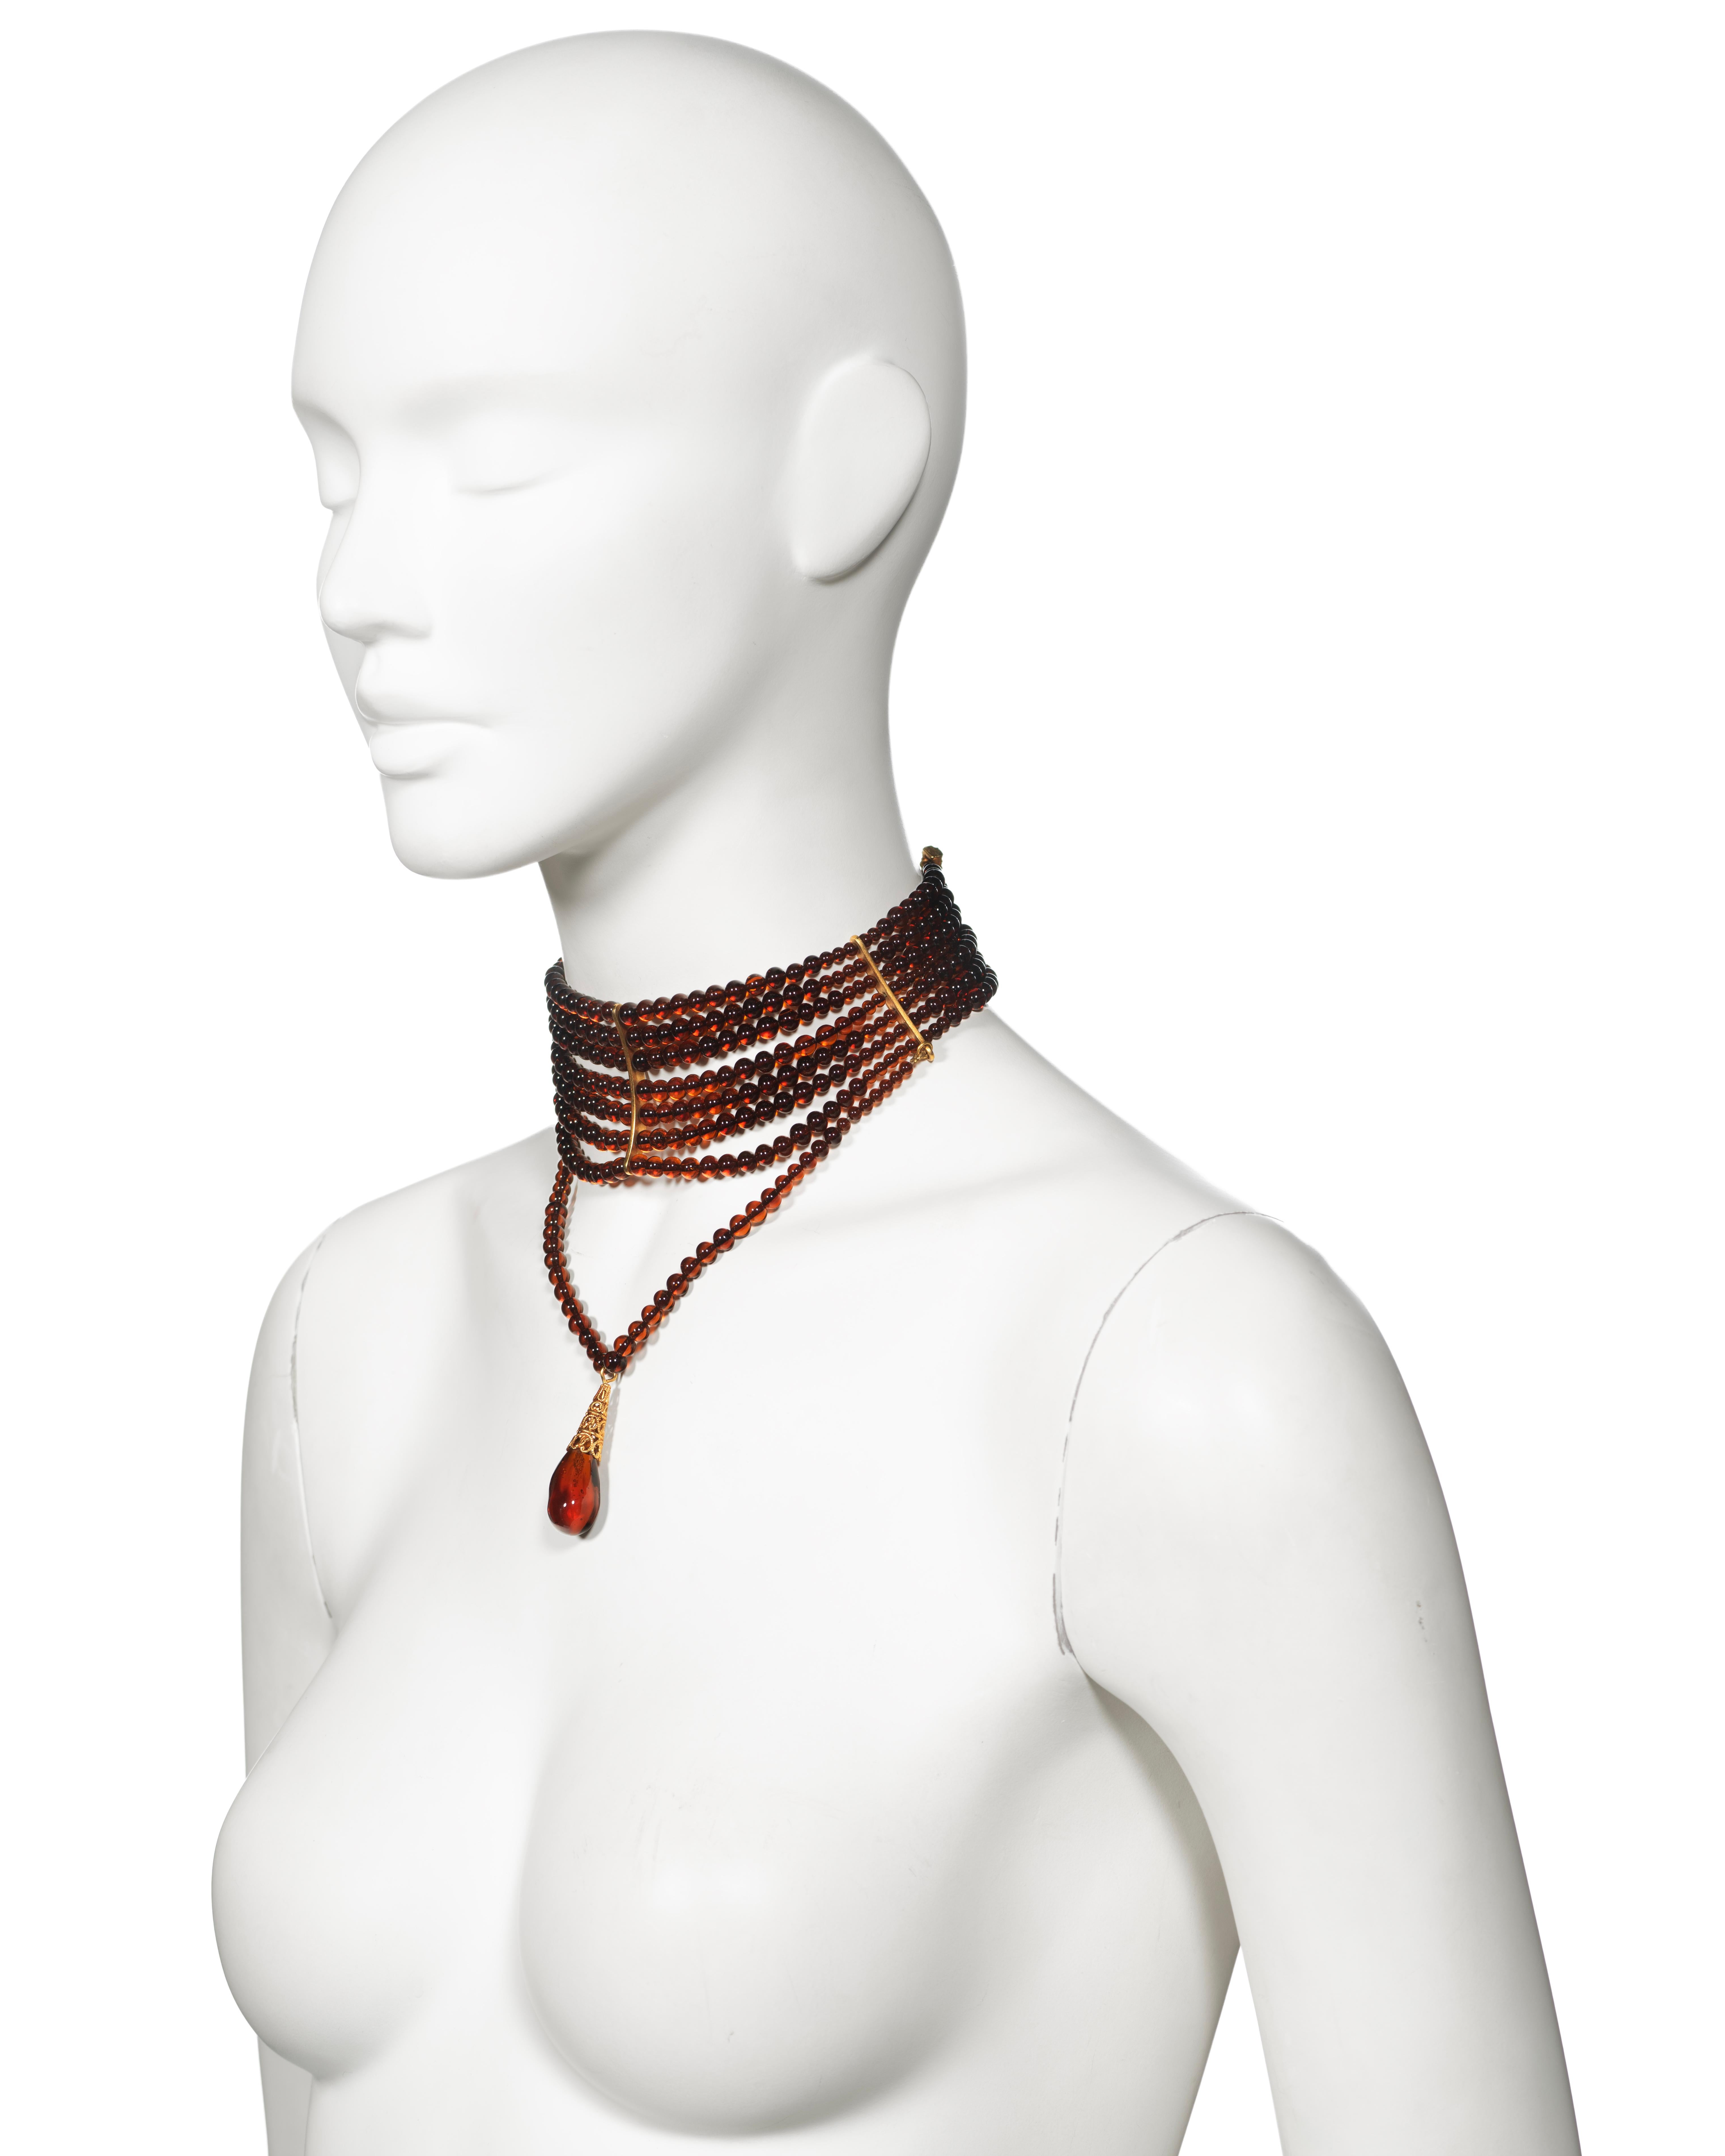 Christian Dior by John Galliano Amber Glass Bead Choker Necklace, c. 1998 For Sale 3